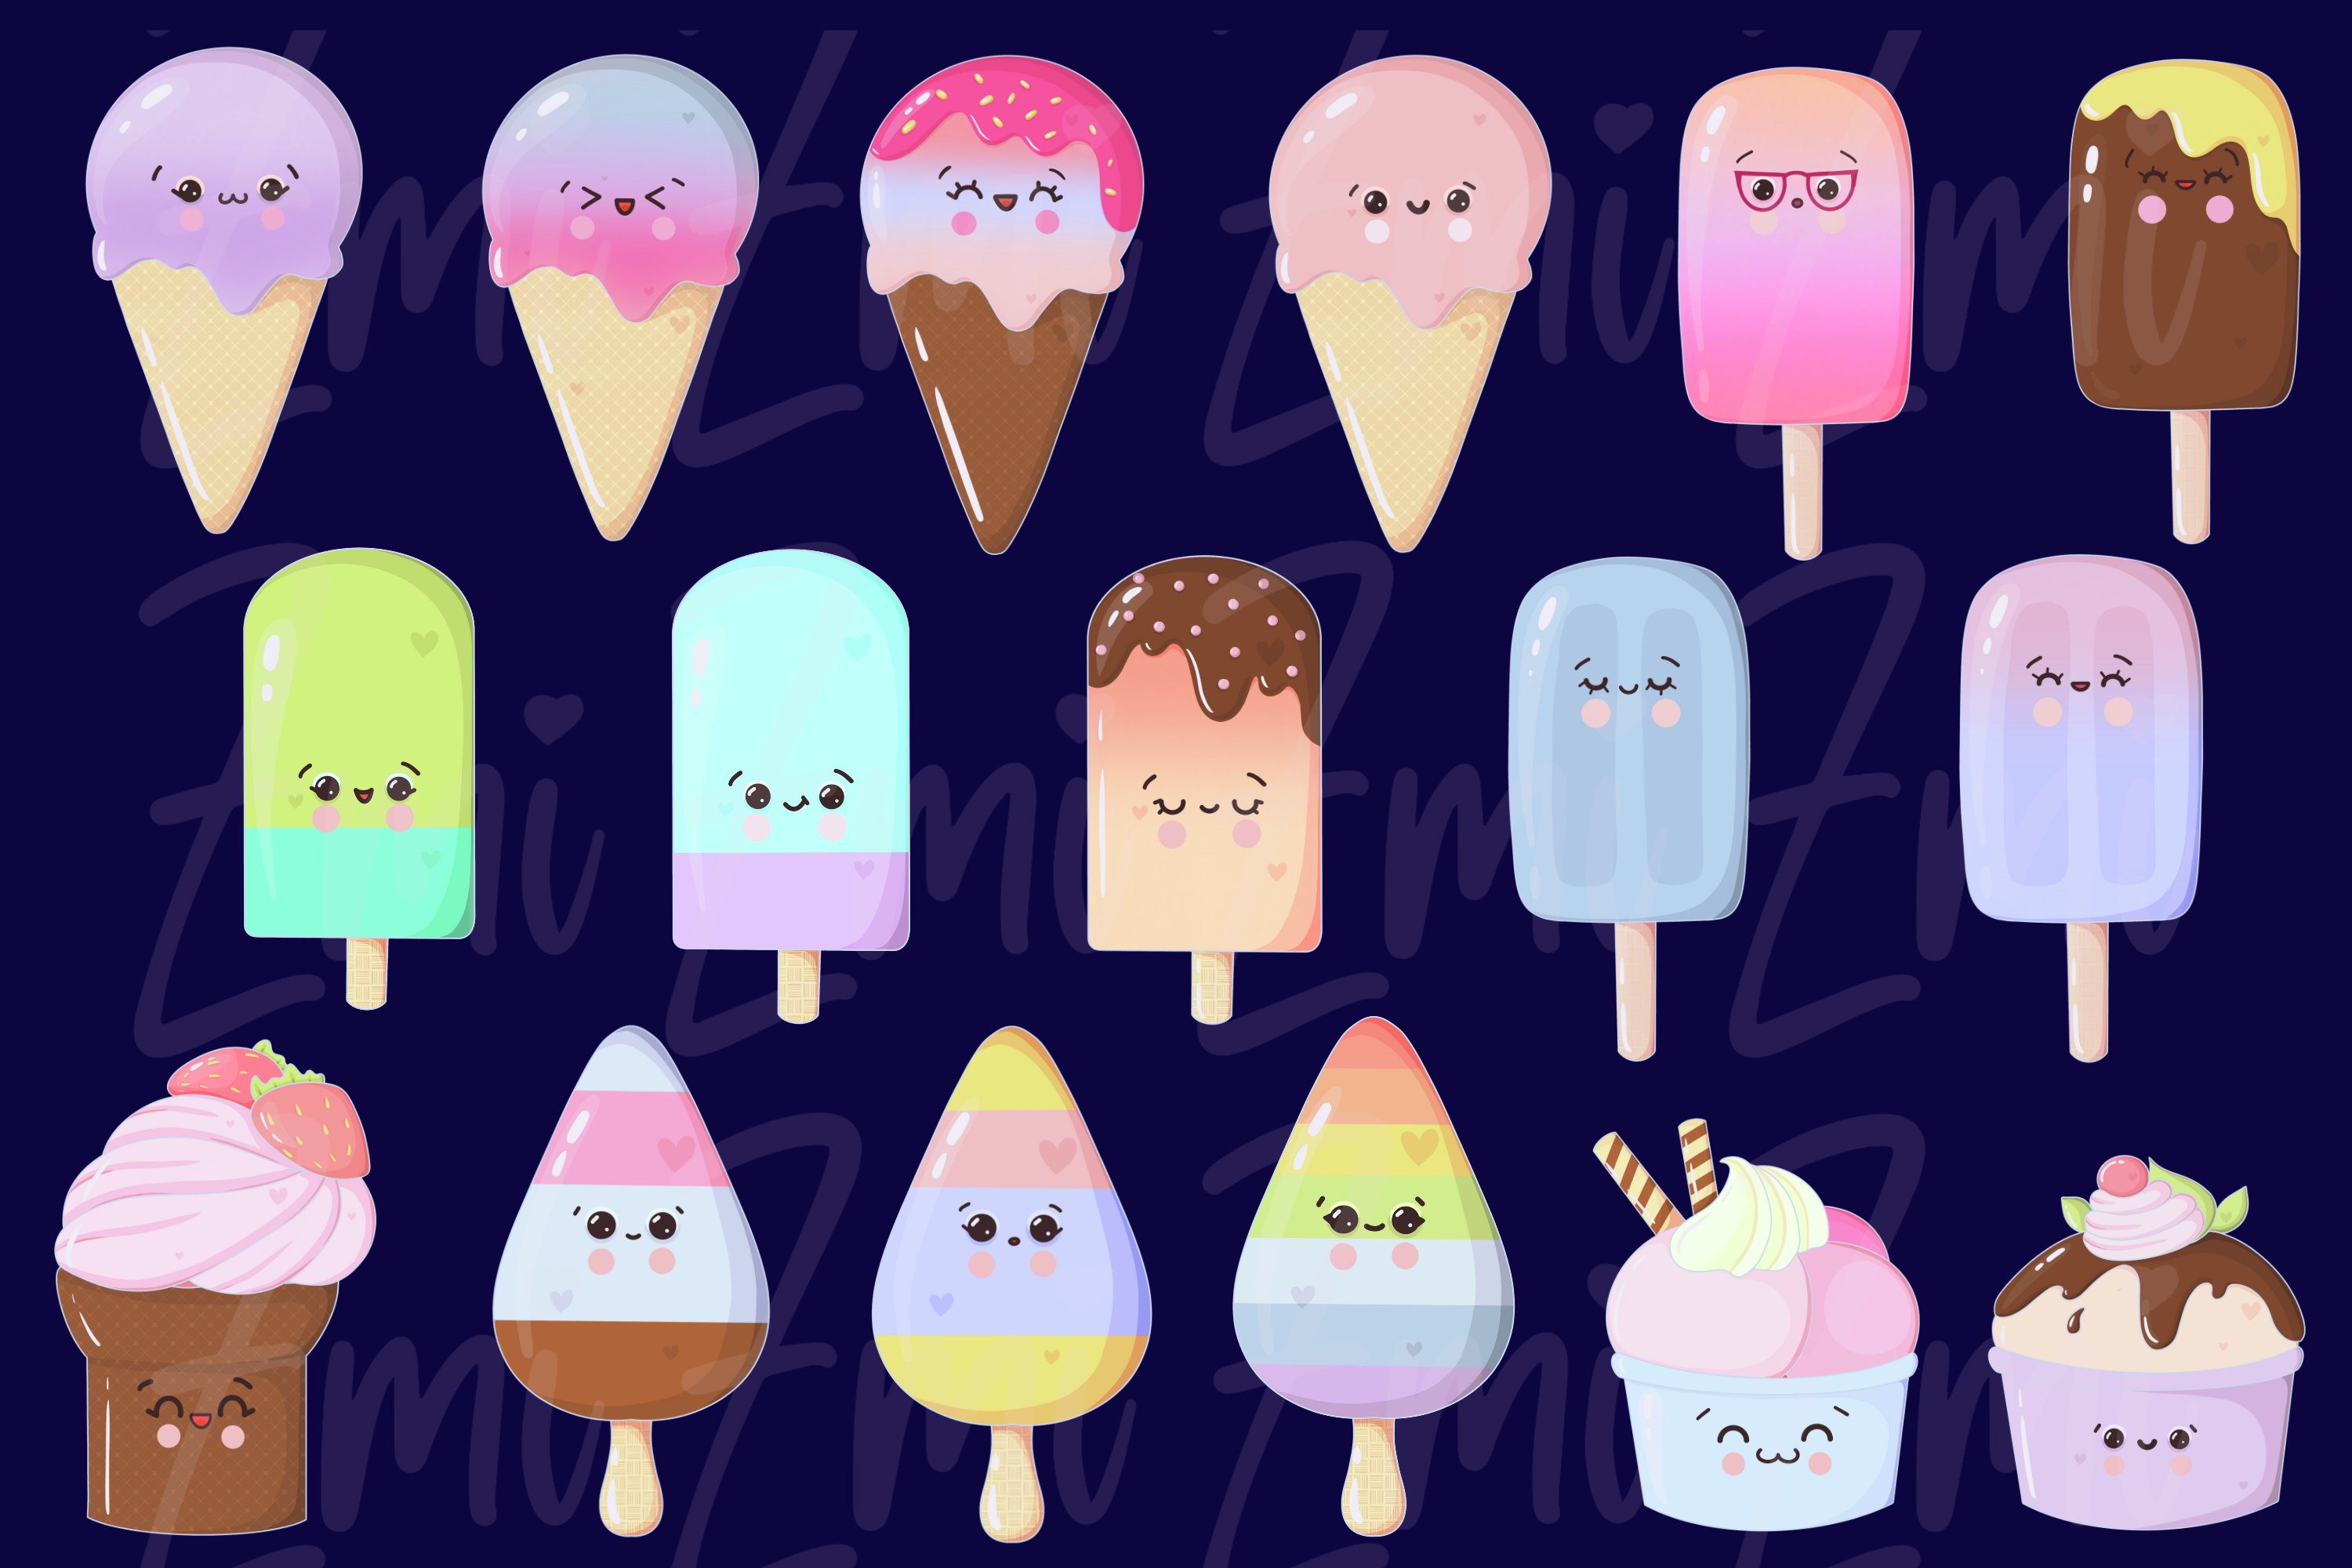 Clipart of colorful kawaii popsicle illustrations on a blue background.